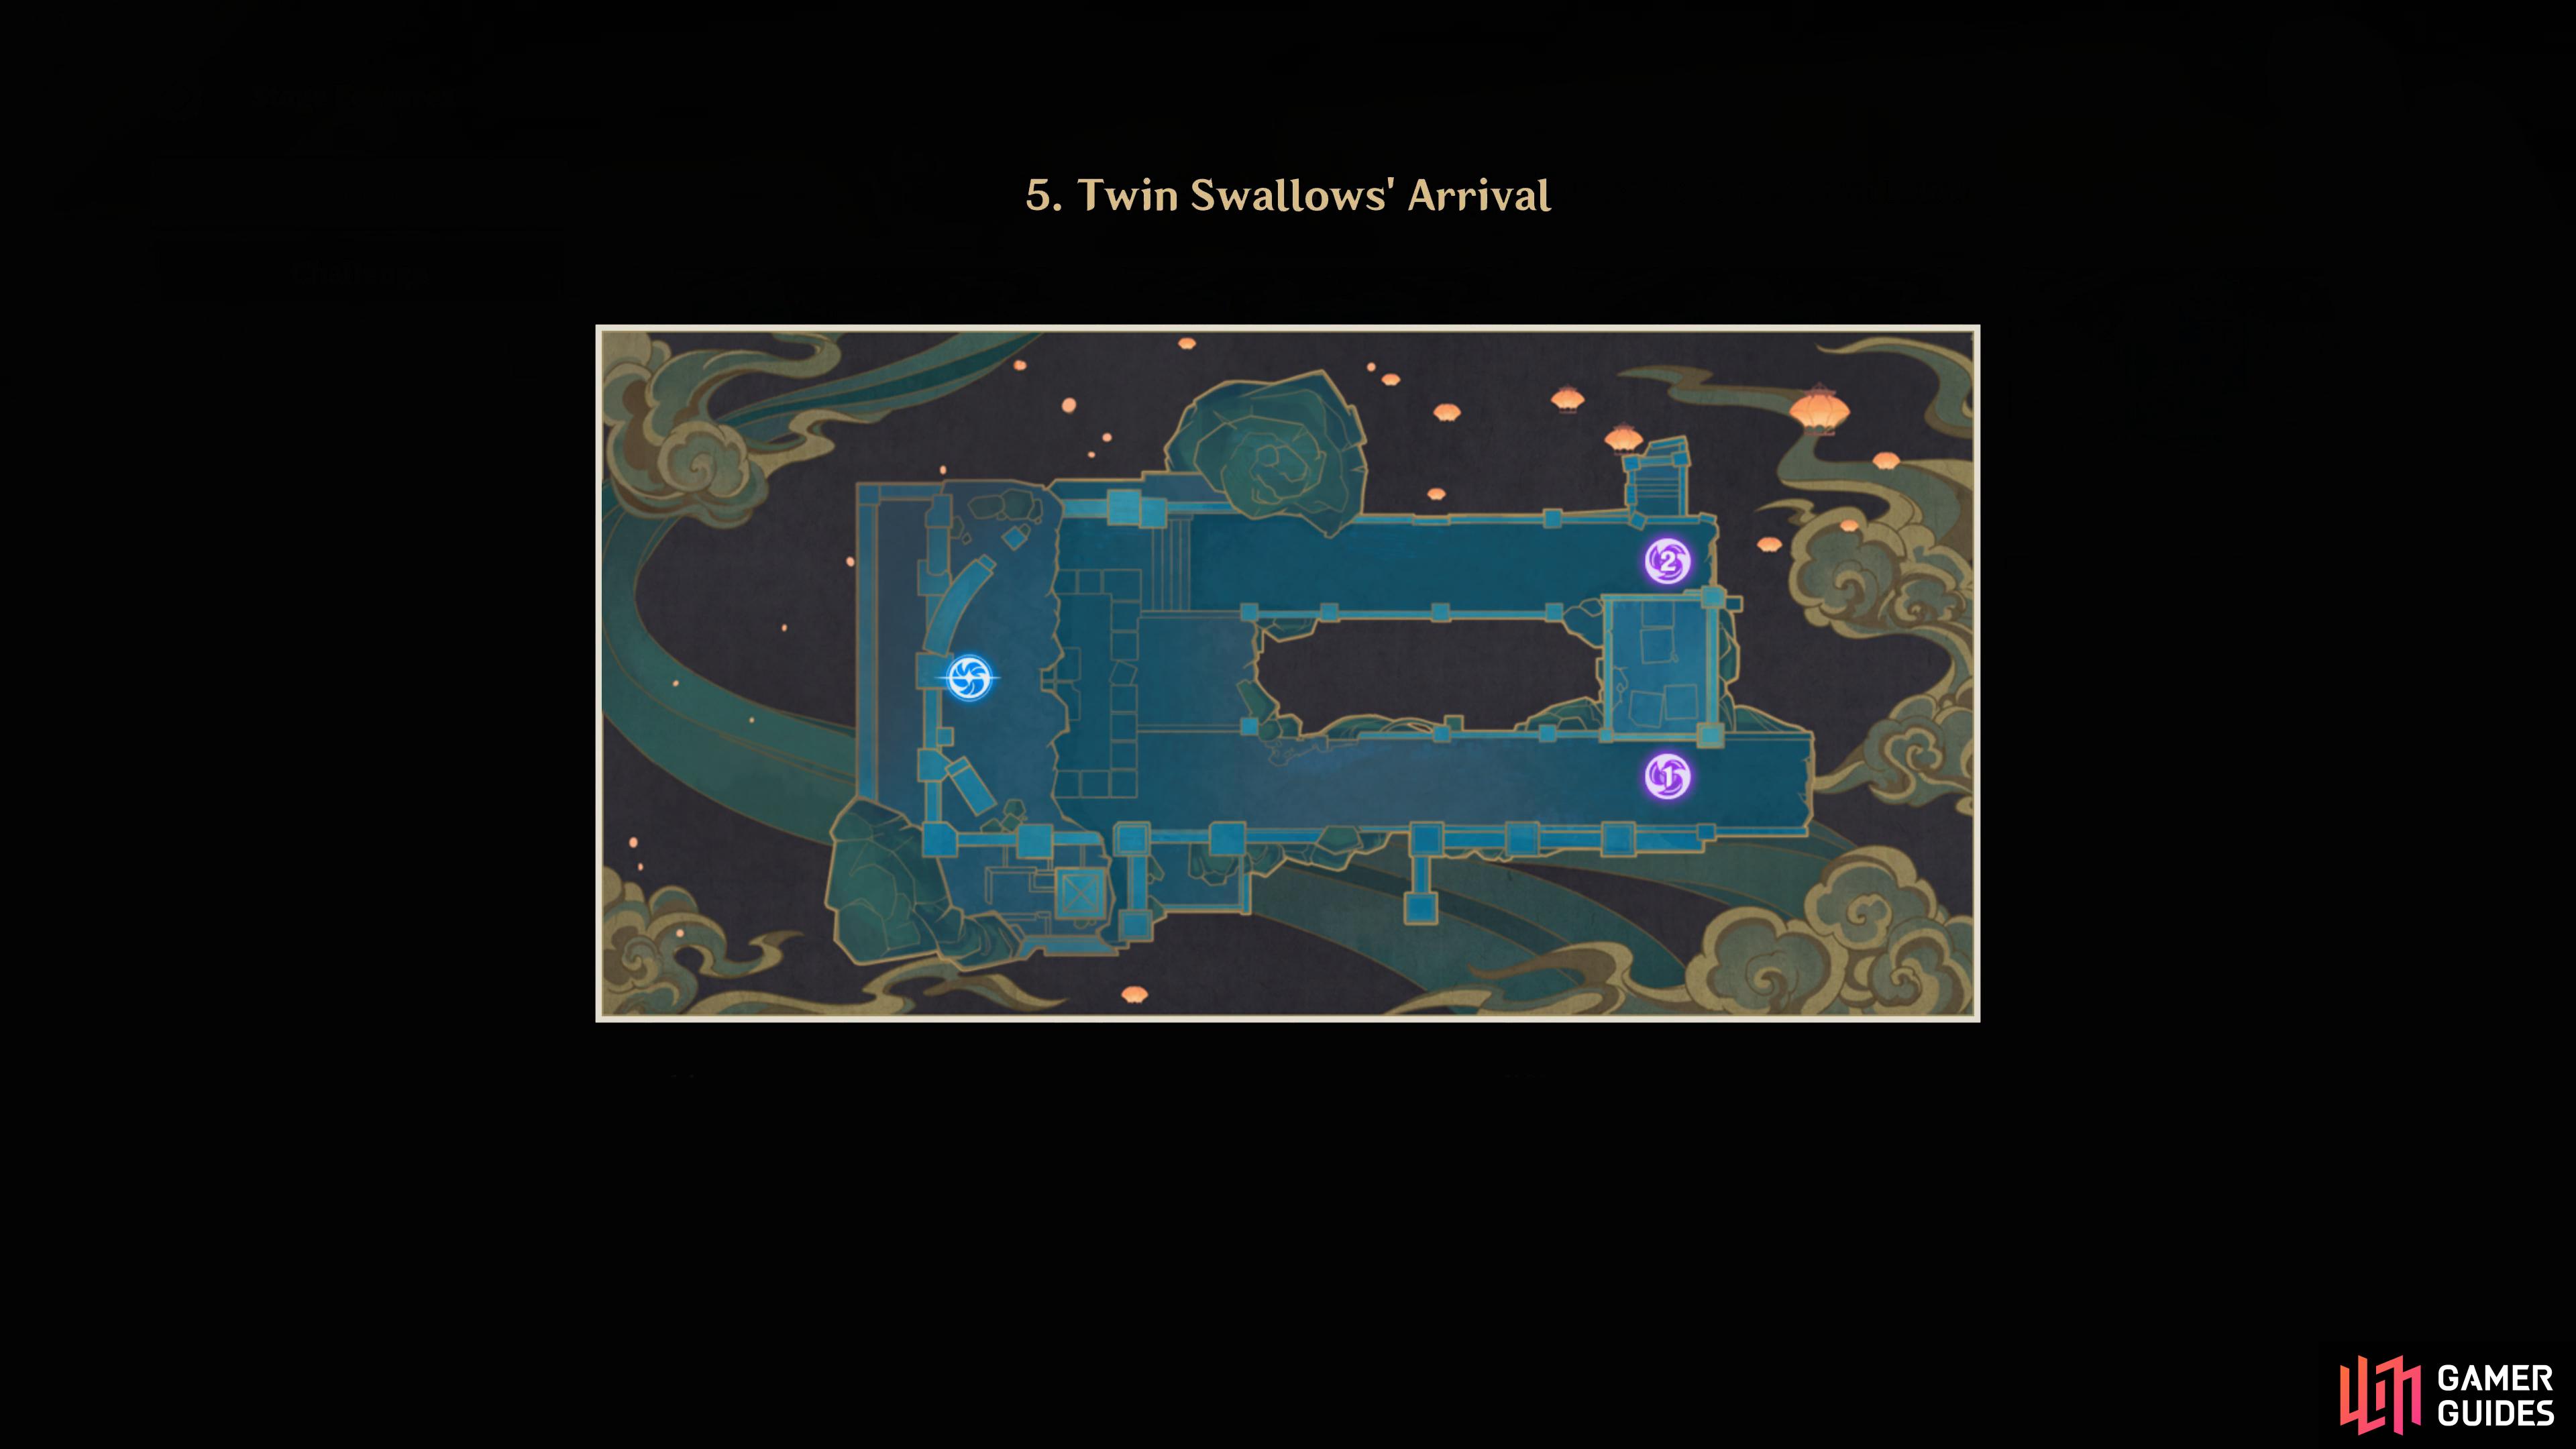 An image of the Twin Swallows’ Arrival map.